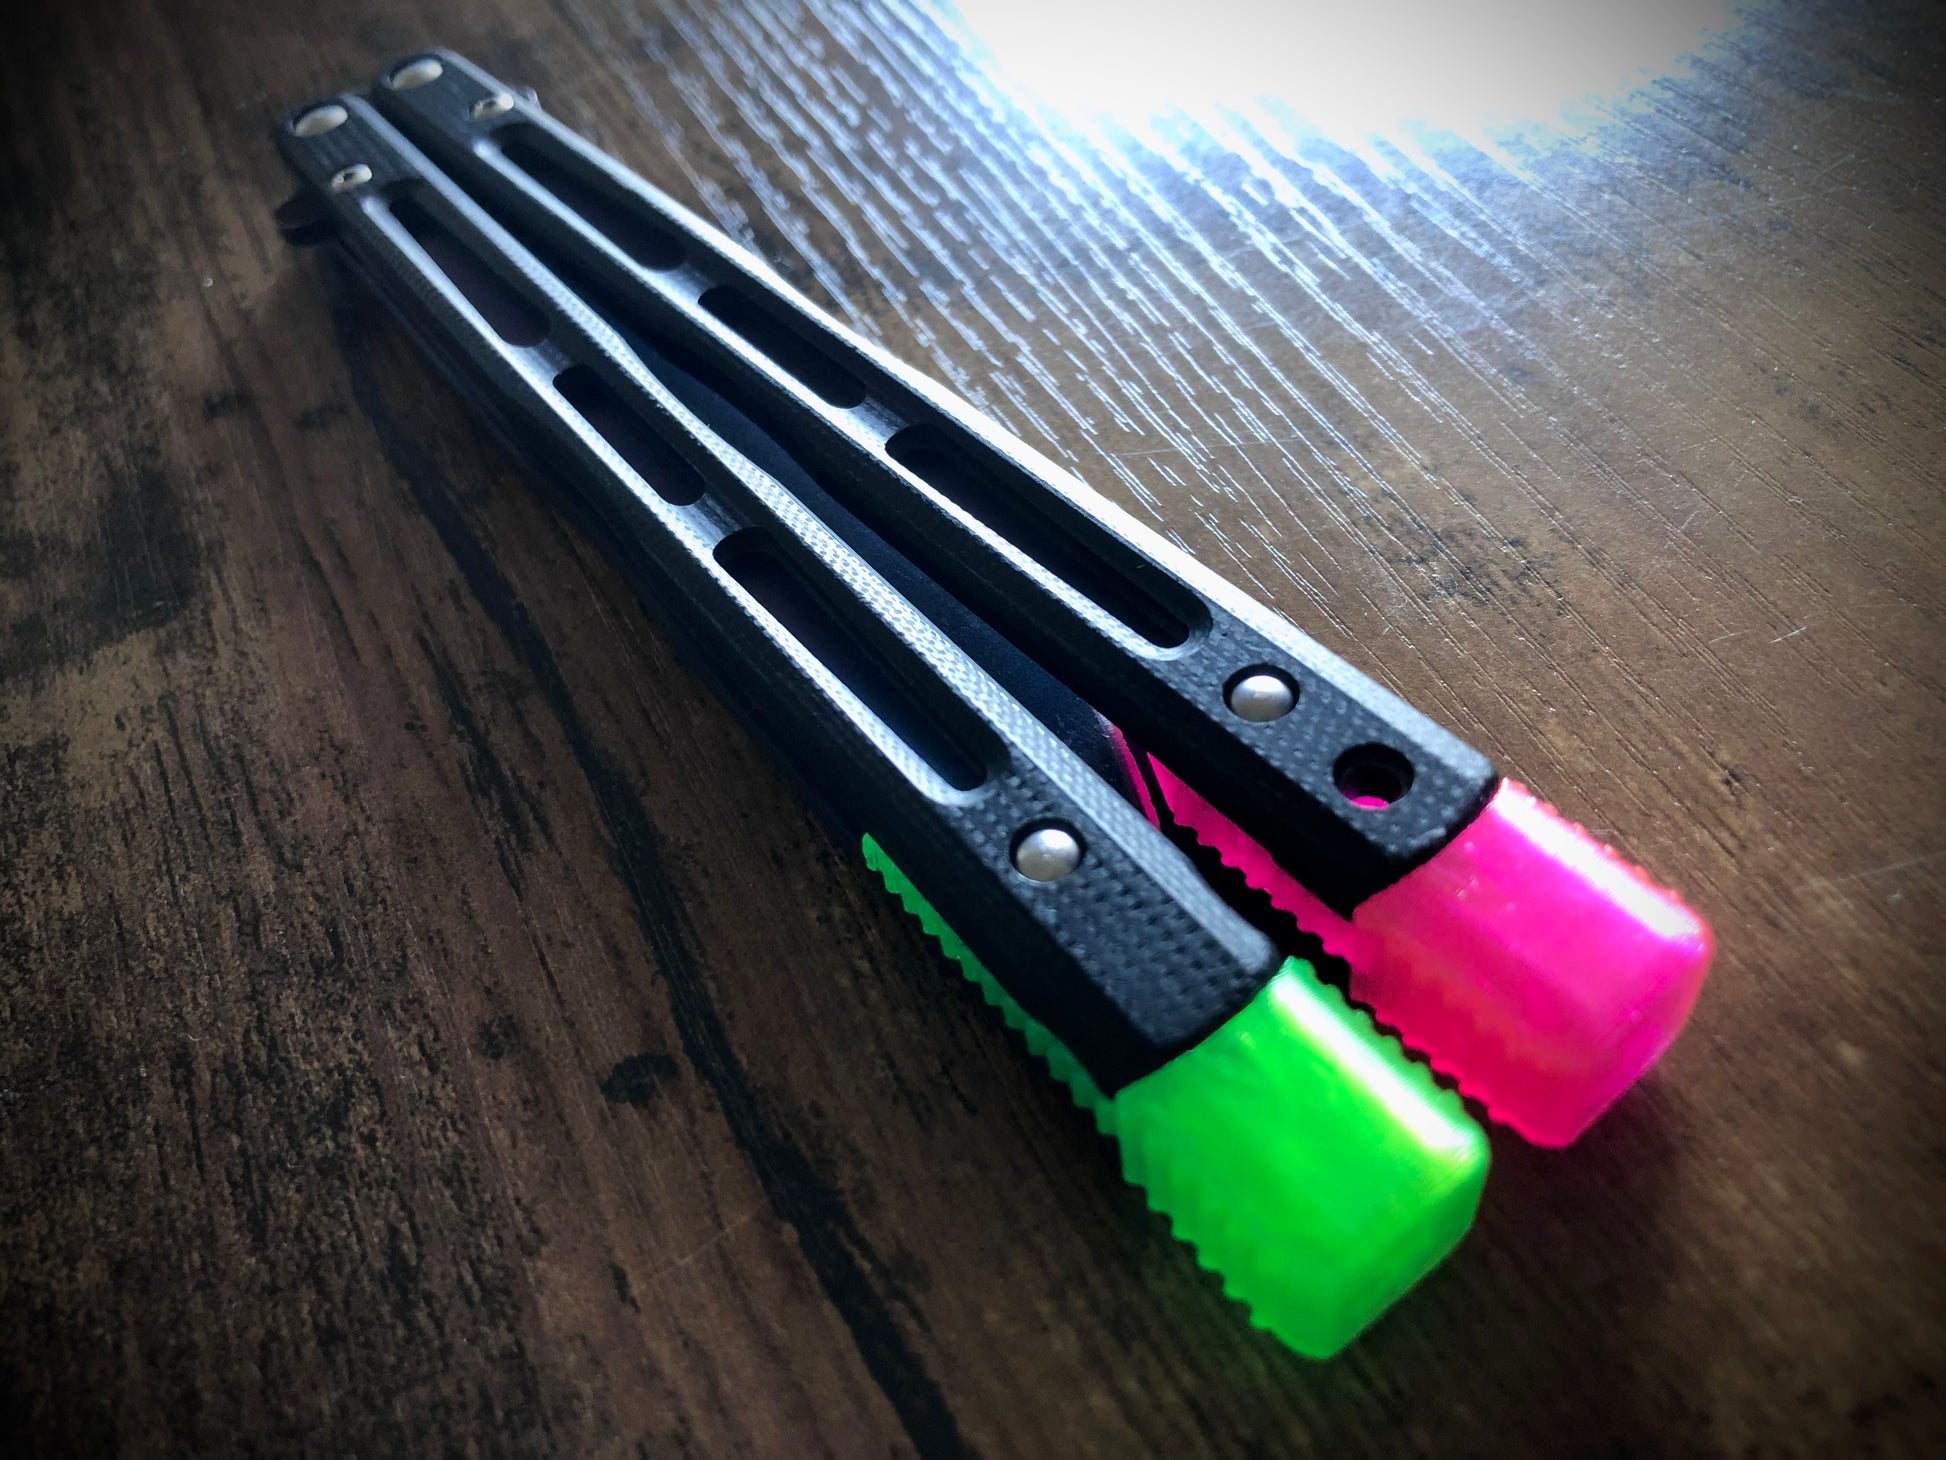 Cousin to Jimpy's discontinued Space Invaders, these Zippy Benchmade 51 spacers are made from a shatter-proof polyurethane with jimping. They extend and protect the handles of the BM 51, and enable adjustable balance with removable tungsten weights.